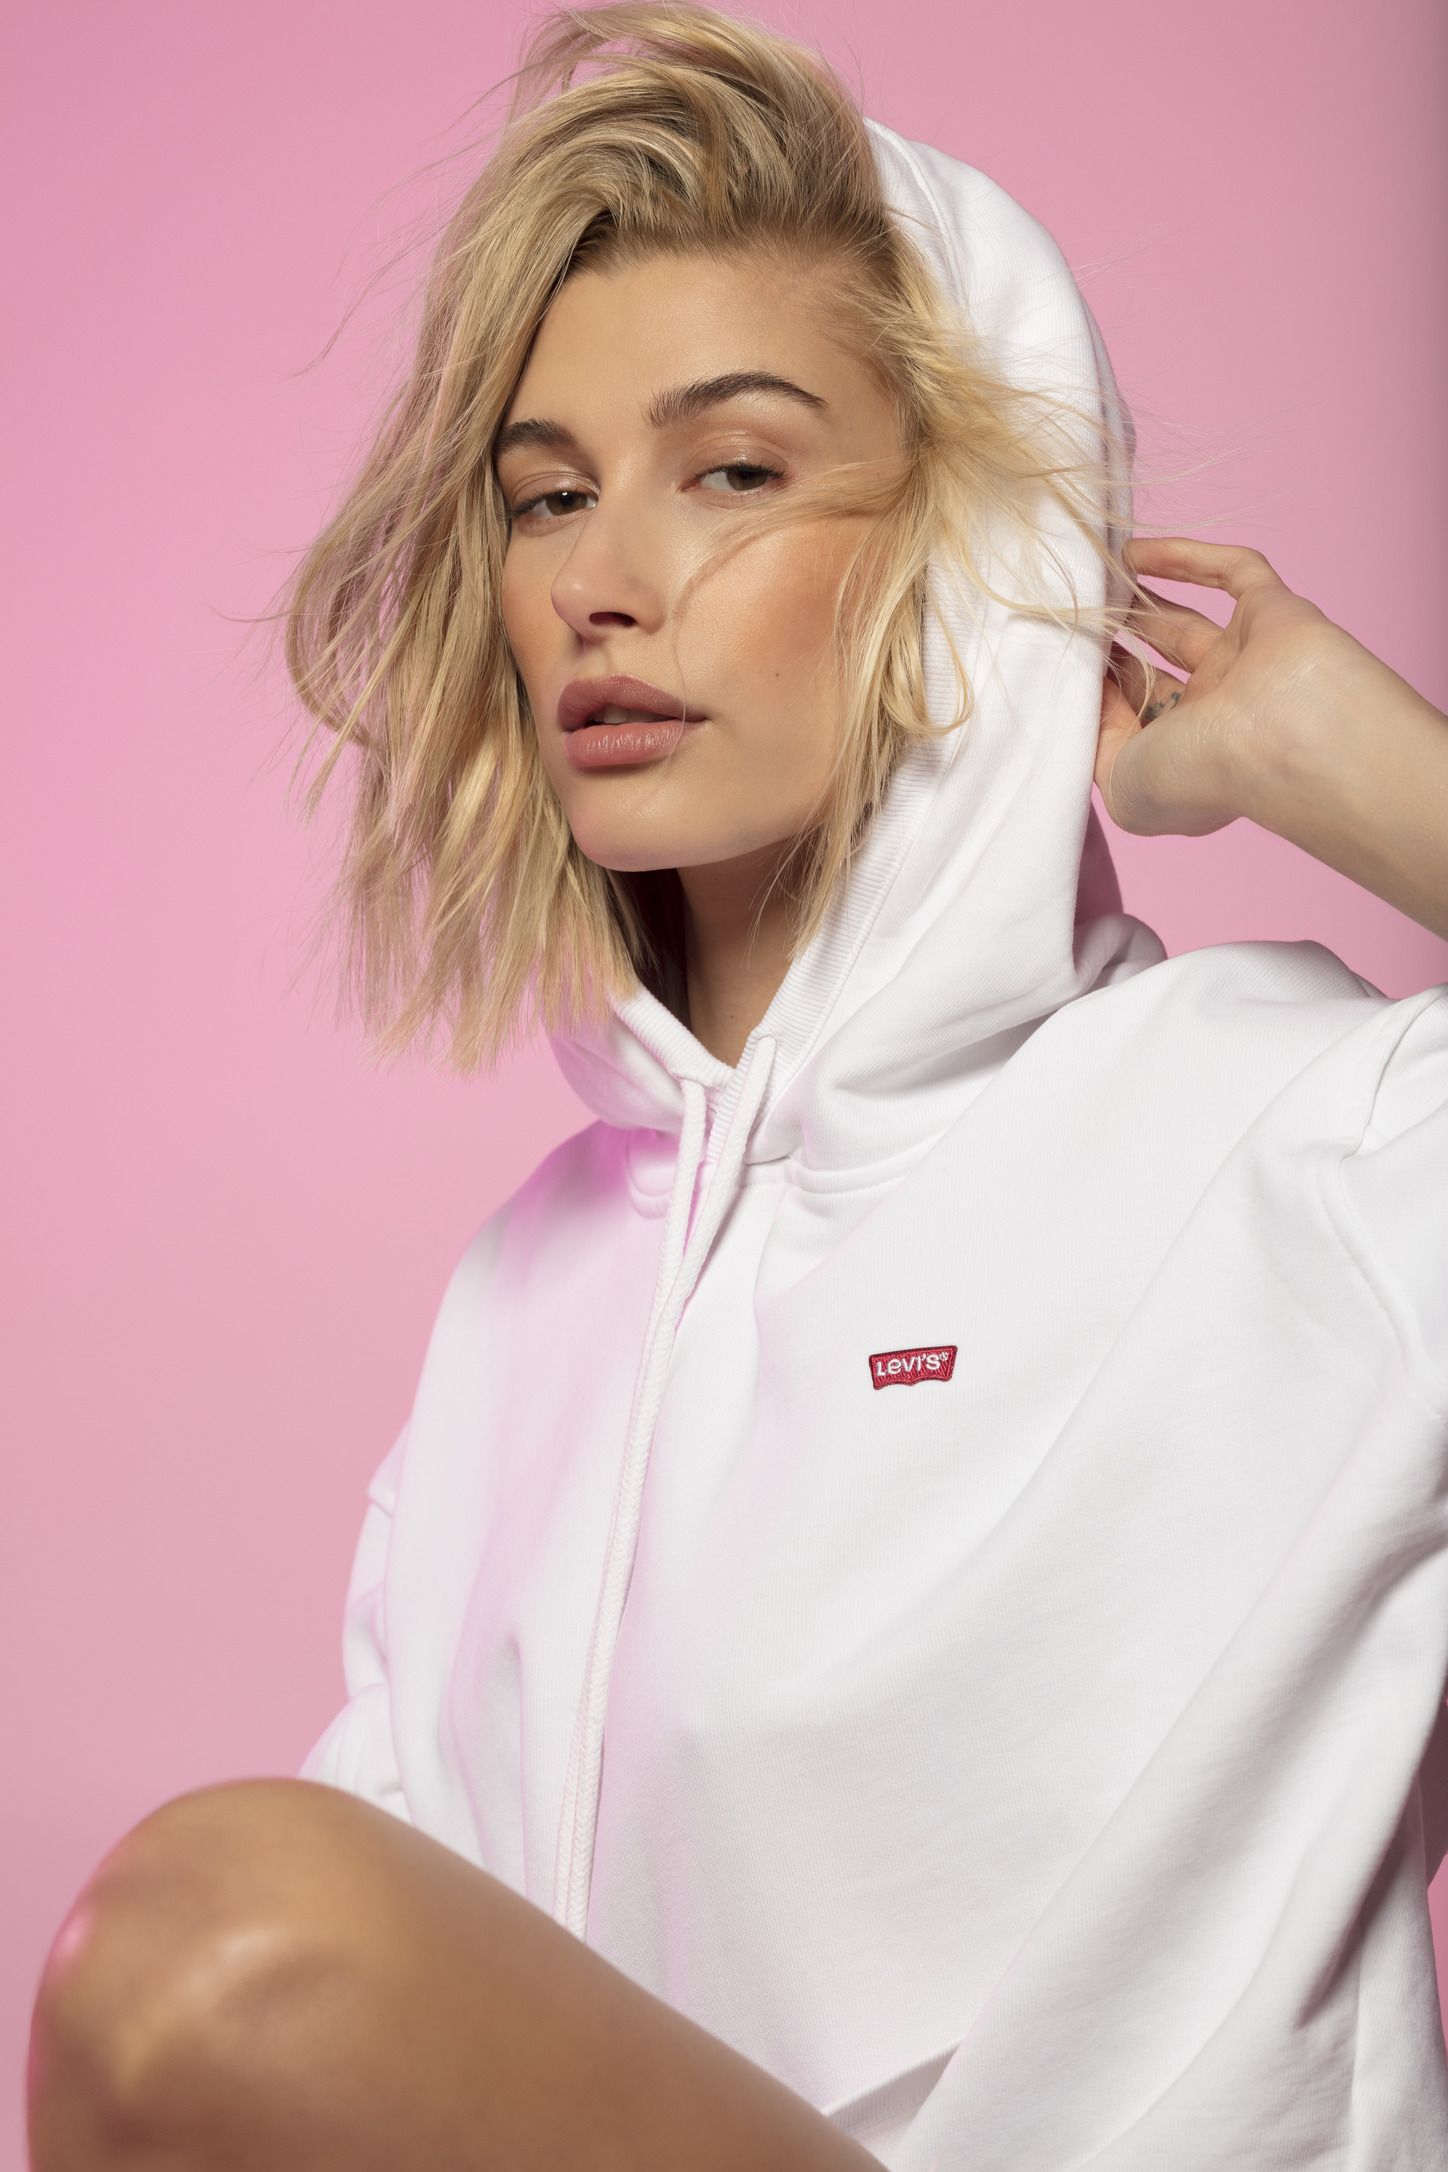 Hailey Baldwin Is the New Face of Levi's 501